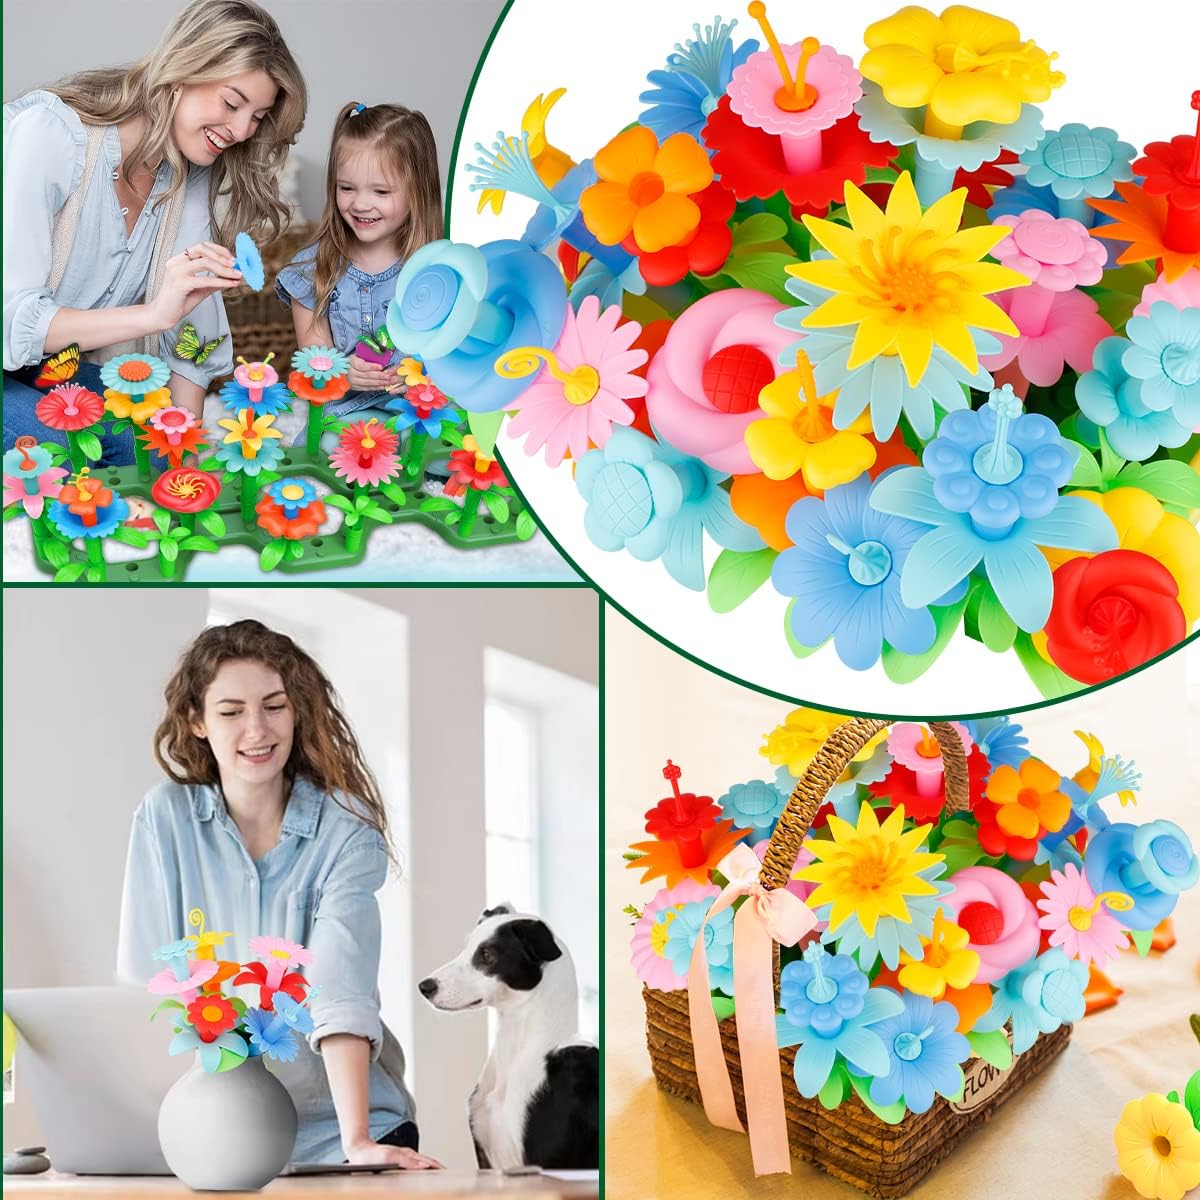 Flower Garden Building Toys for 3, 4, 5, 6, 7 Year Old Girls Boy,Stacking Game Educational STEM Toy and Preschool Garden Play Set for Toddlers, Chris as Birthday Gifts for Creativity Play , 152pcs